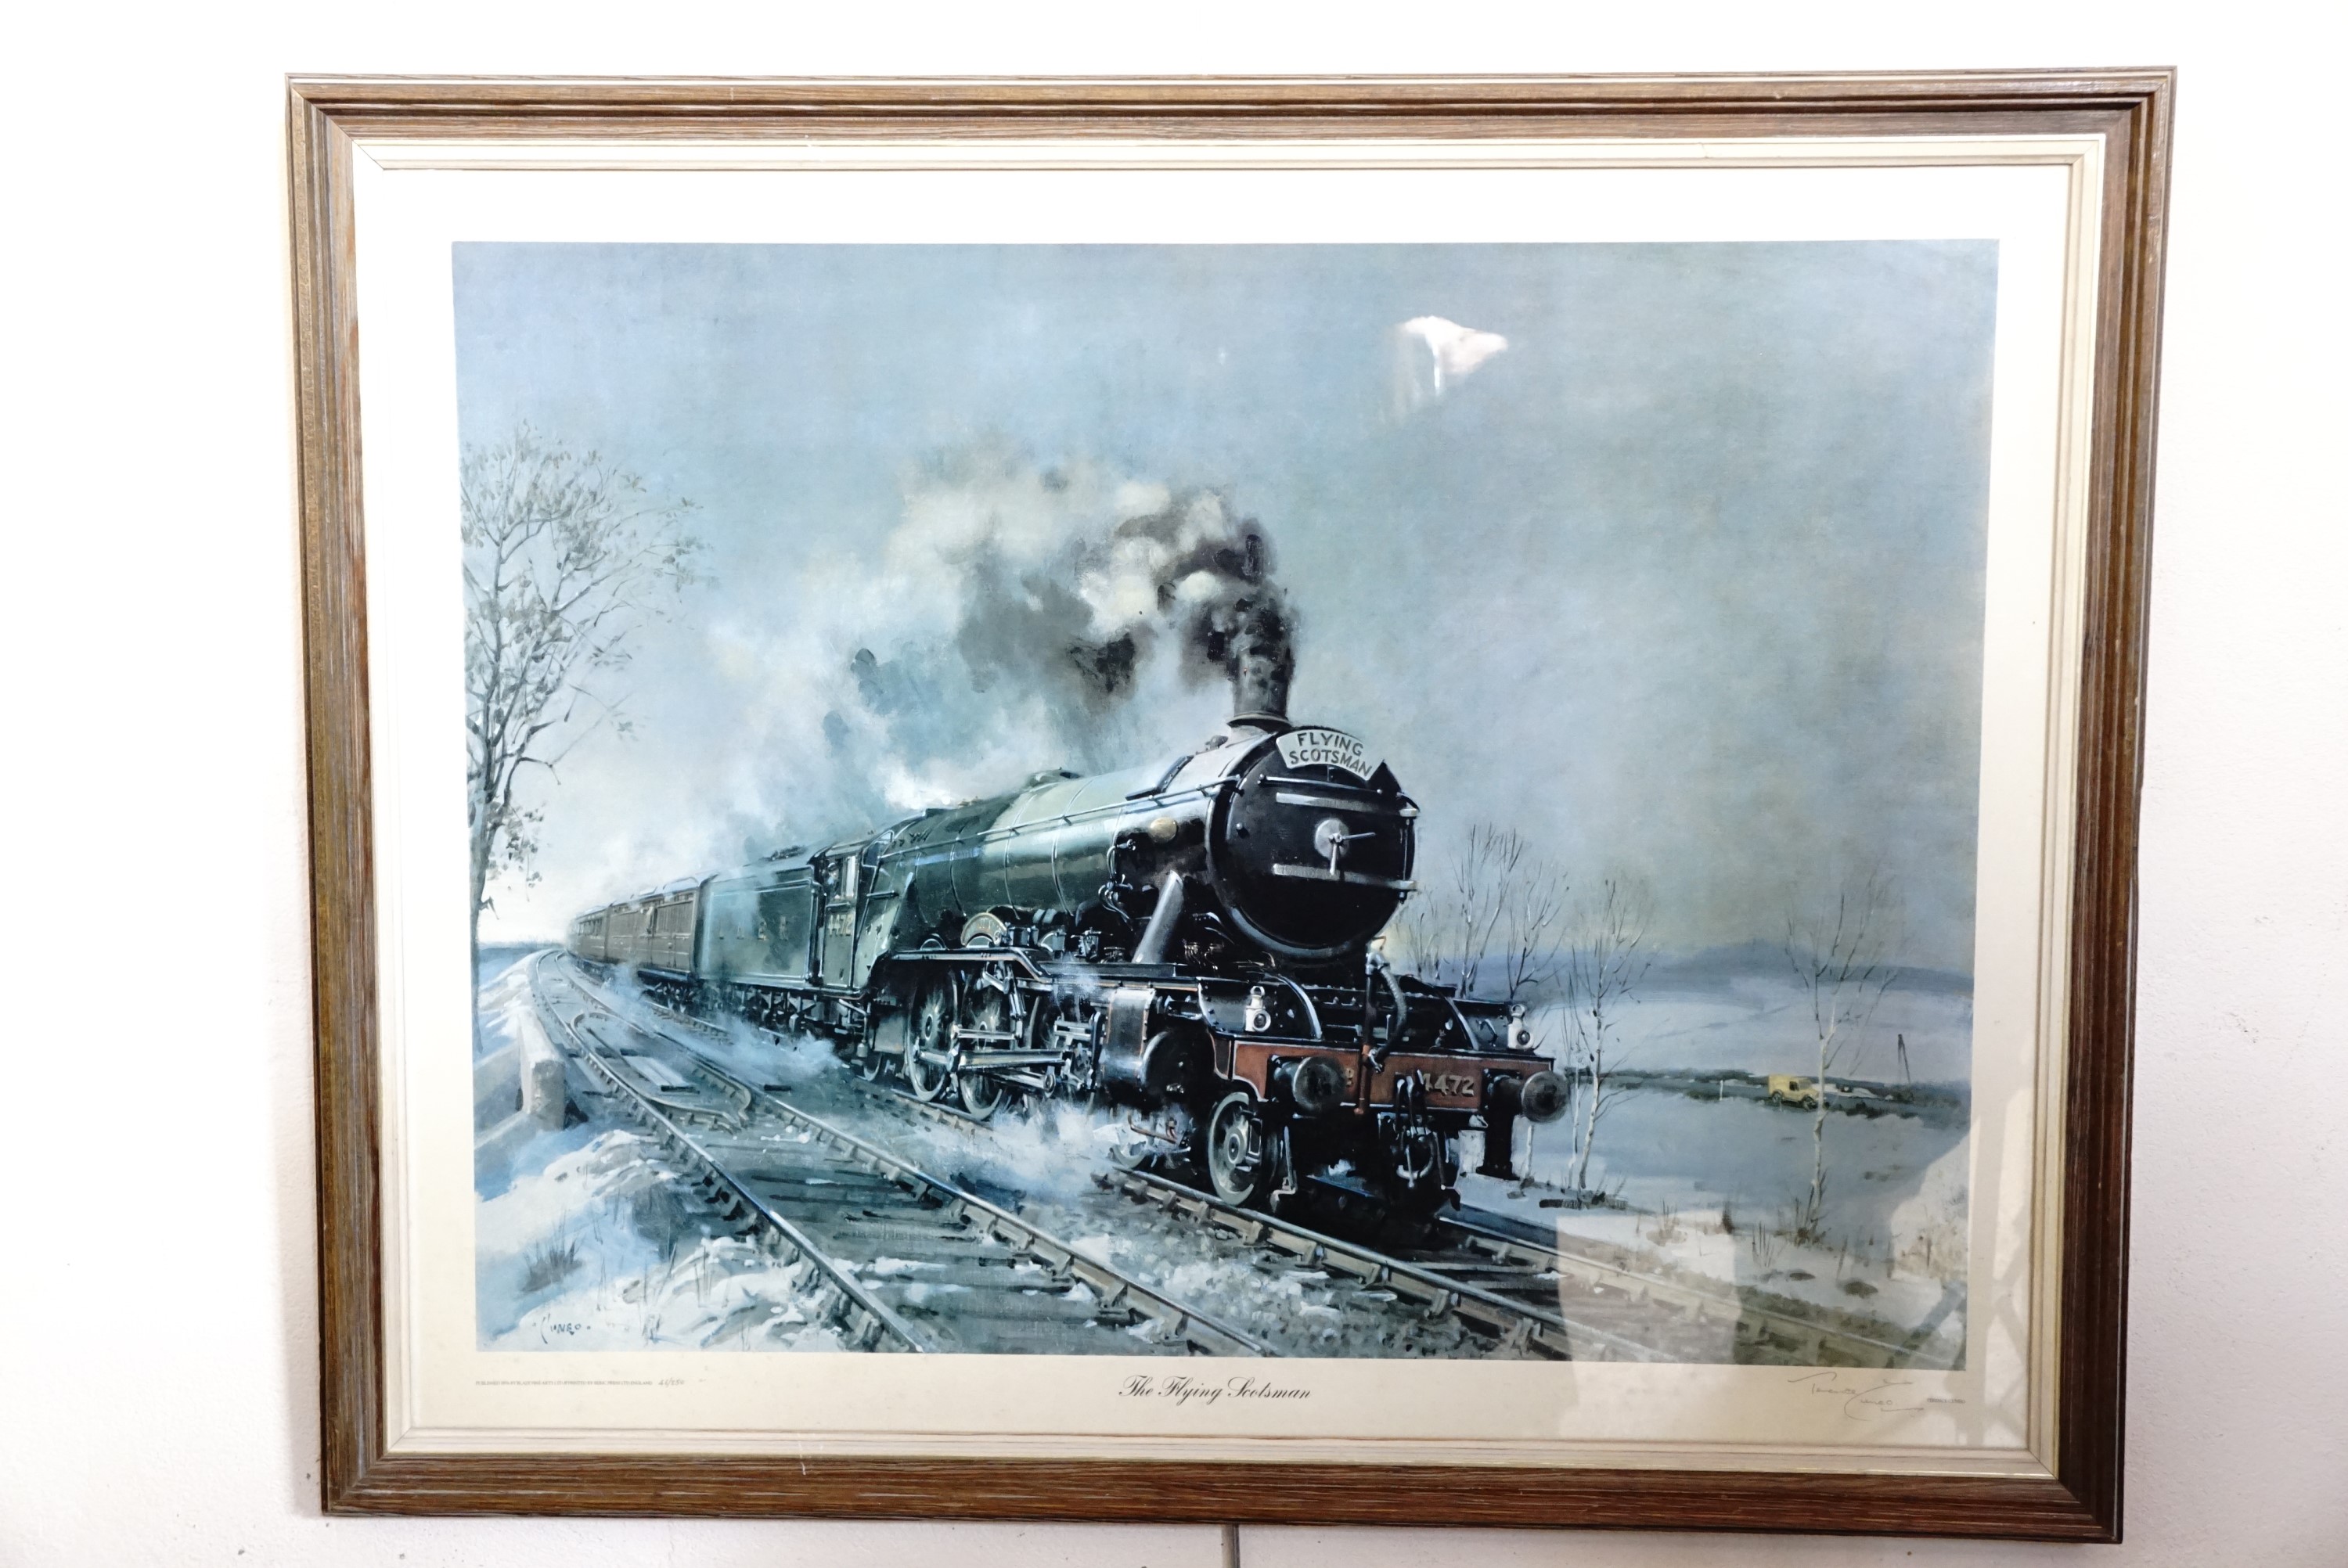 After Terence Cuneo (1907-1996) "The Flying Scotsman", signed limited edition offset lithographic